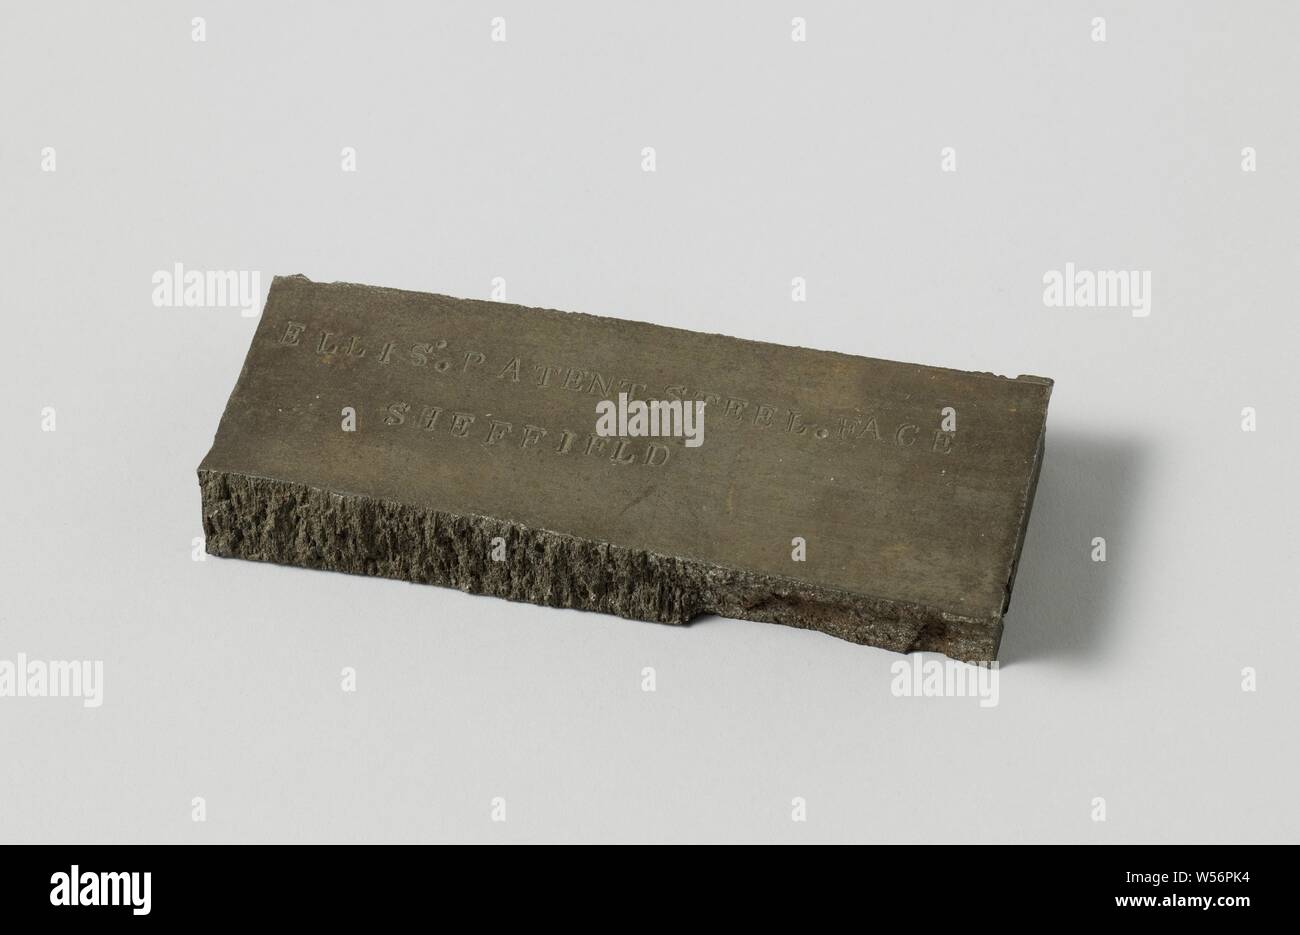 Sample of Ellis Patent Steel, Sample of Ellis patent steel with labeling, industrial processes, handling of materials (base metals, crafts, industries, agriculture), Sheffield, John Brown & Co. Ltd, John Brown, Sheffield (possibly), 1850 - 1900, steel (alloy), l 15.3 cm × w 6.3 cm Stock Photo